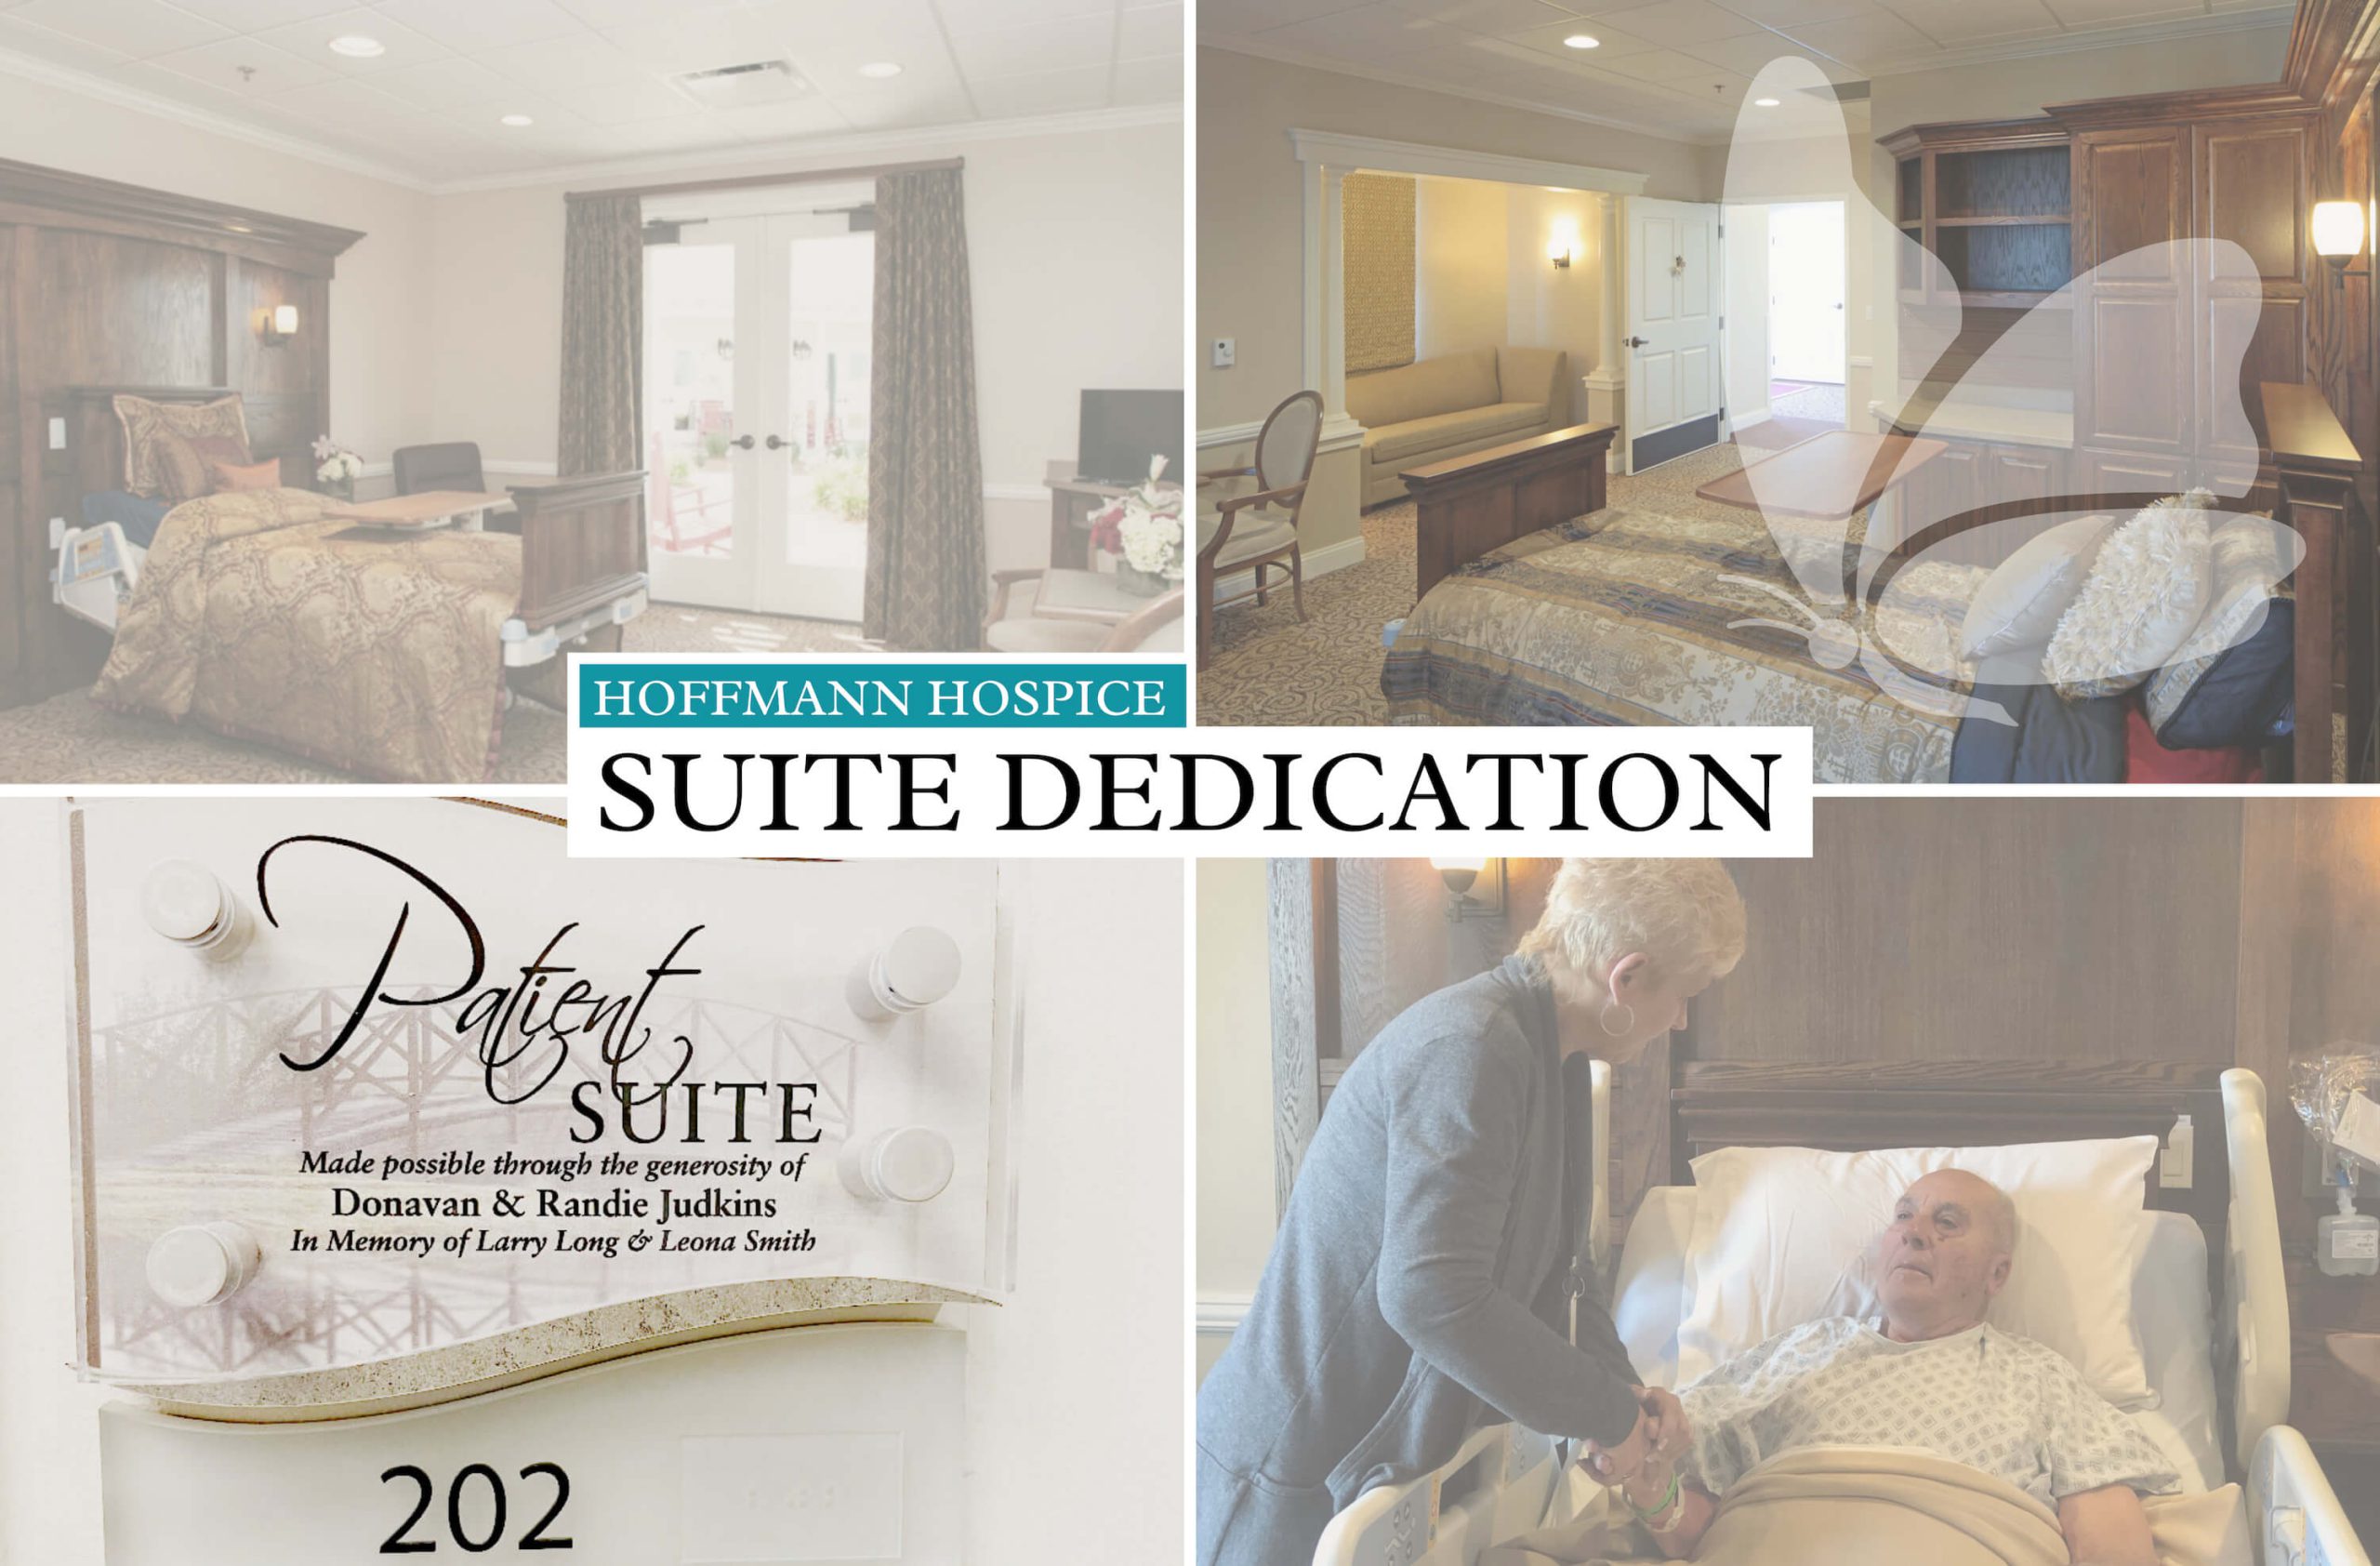 A collage of images showing the dedication of a patient suite at Hoffmann Hospice. The top images display the interior of a warmly furnished patient suite with a comfortable bed, seating area, and natural light from large windows. The bottom left image shows a plaque that reads 'Patient Suite, Made possible through the generosity of Donavan & Randie Judkins, In Memory of Larry Long & Leona Smith.' The bottom right image shows a caregiver holding hands with a patient in bed. Text overlay reads 'Hoffmann Hospice Suite Dedication.